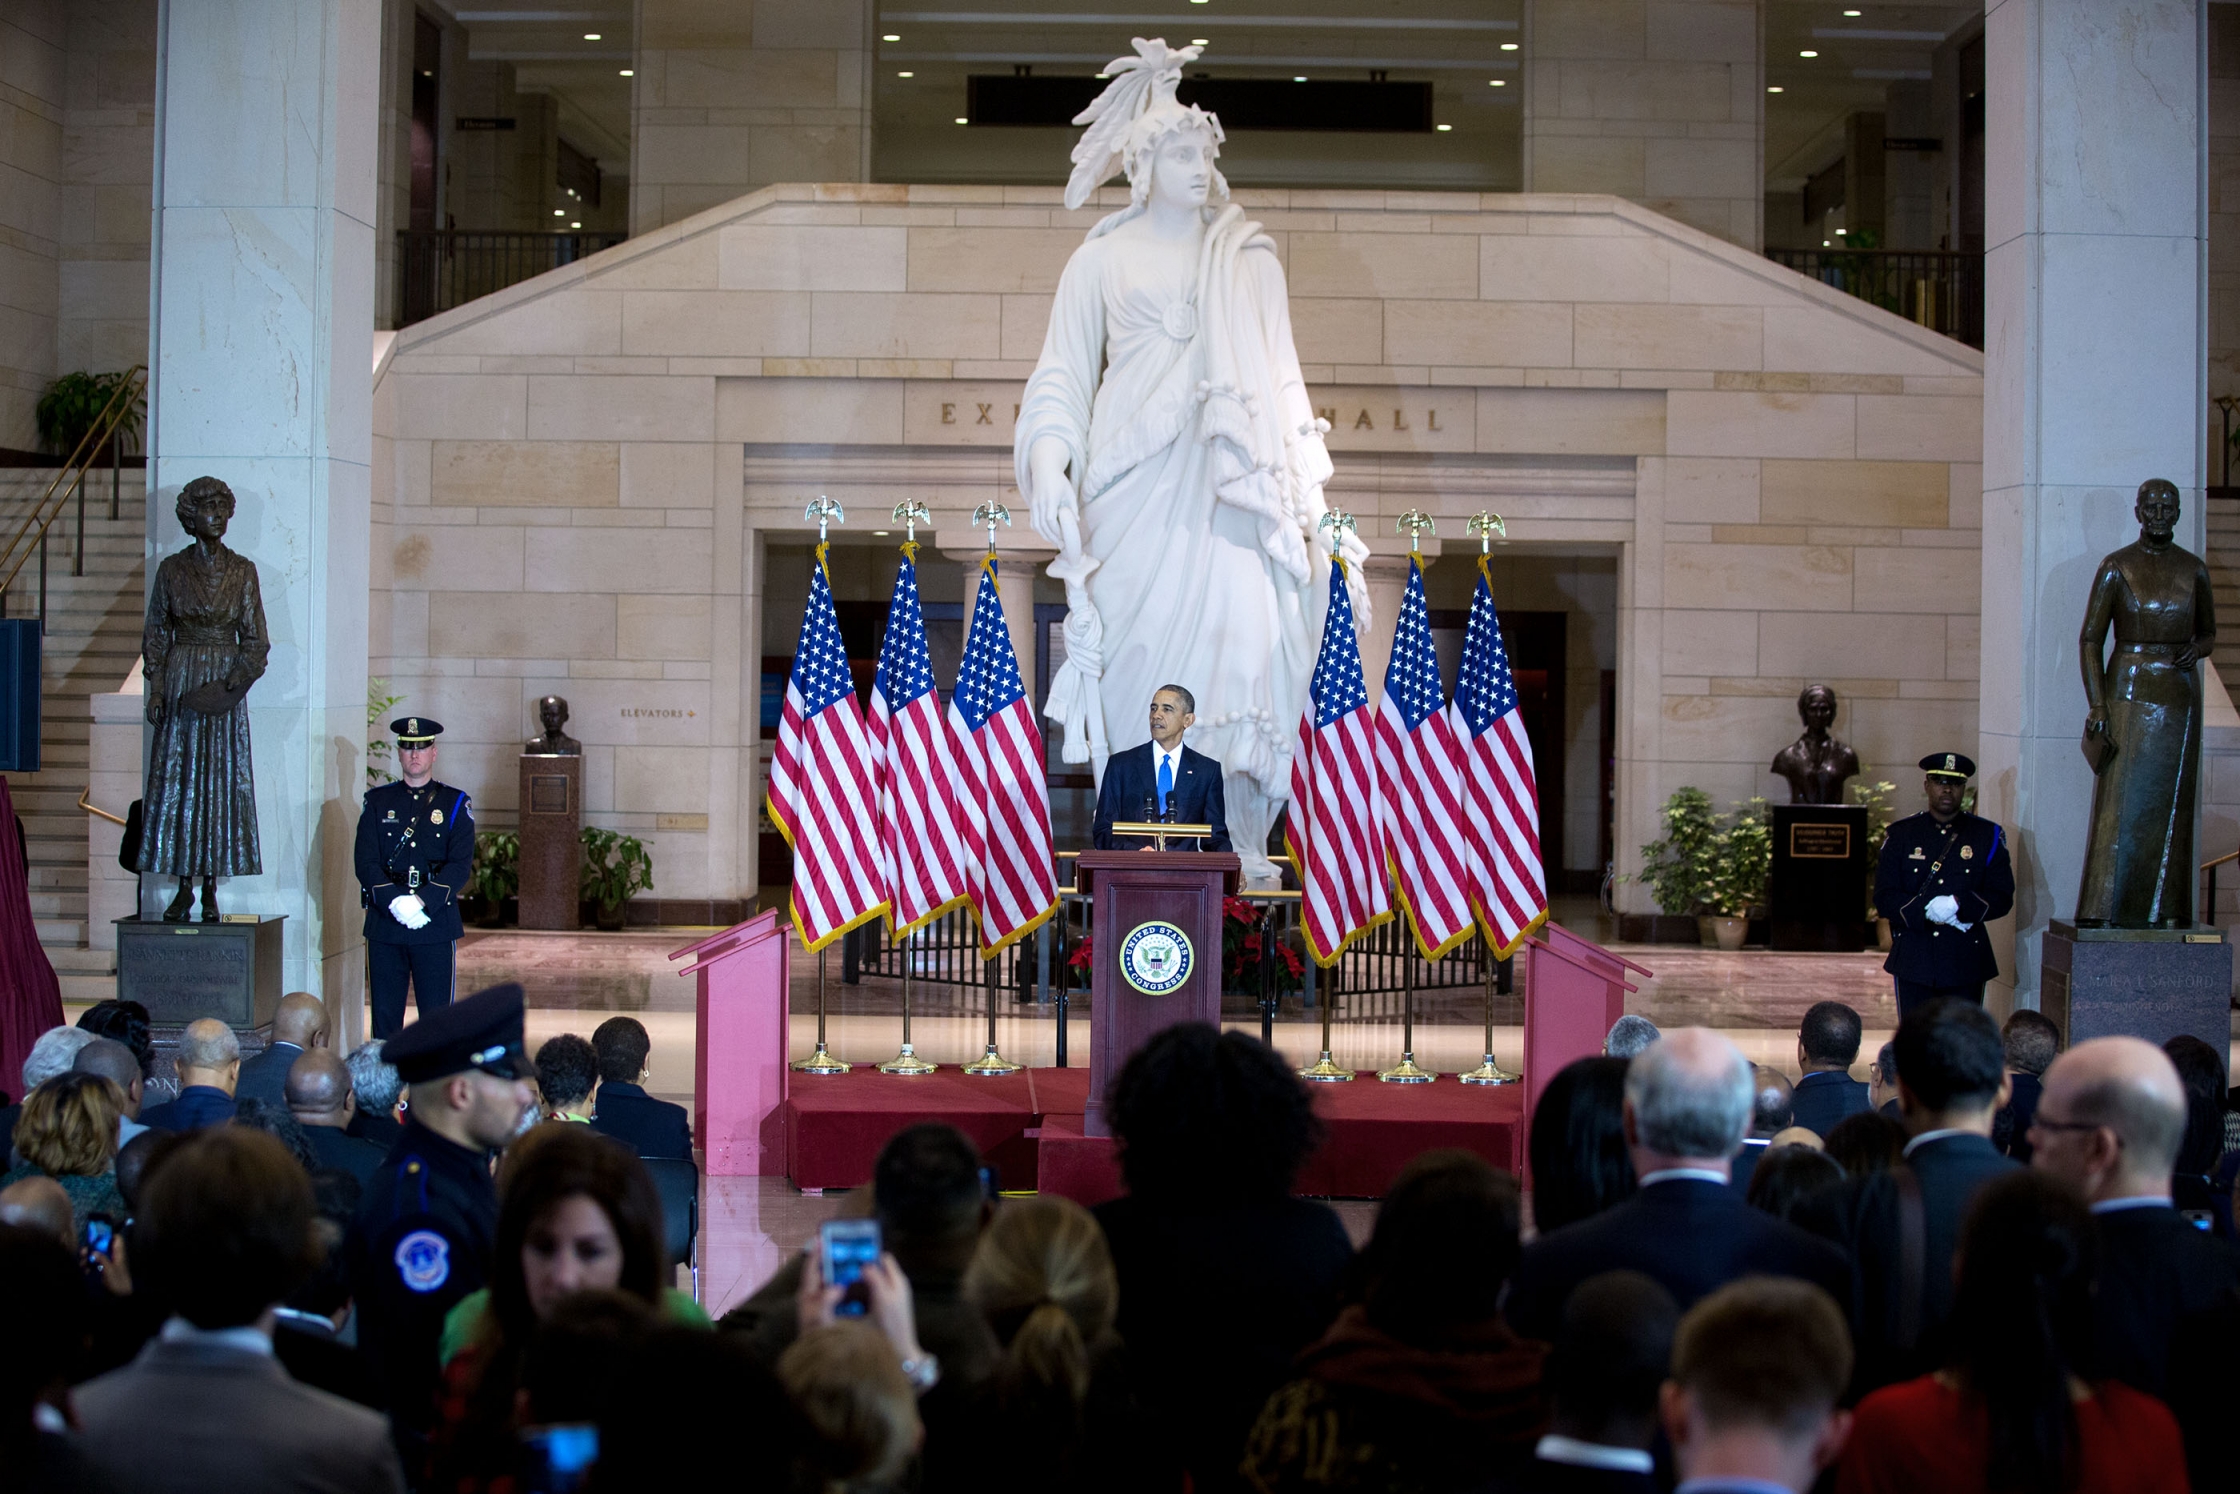 President Obama Speaks on the Anniversary of the 13th Amendment